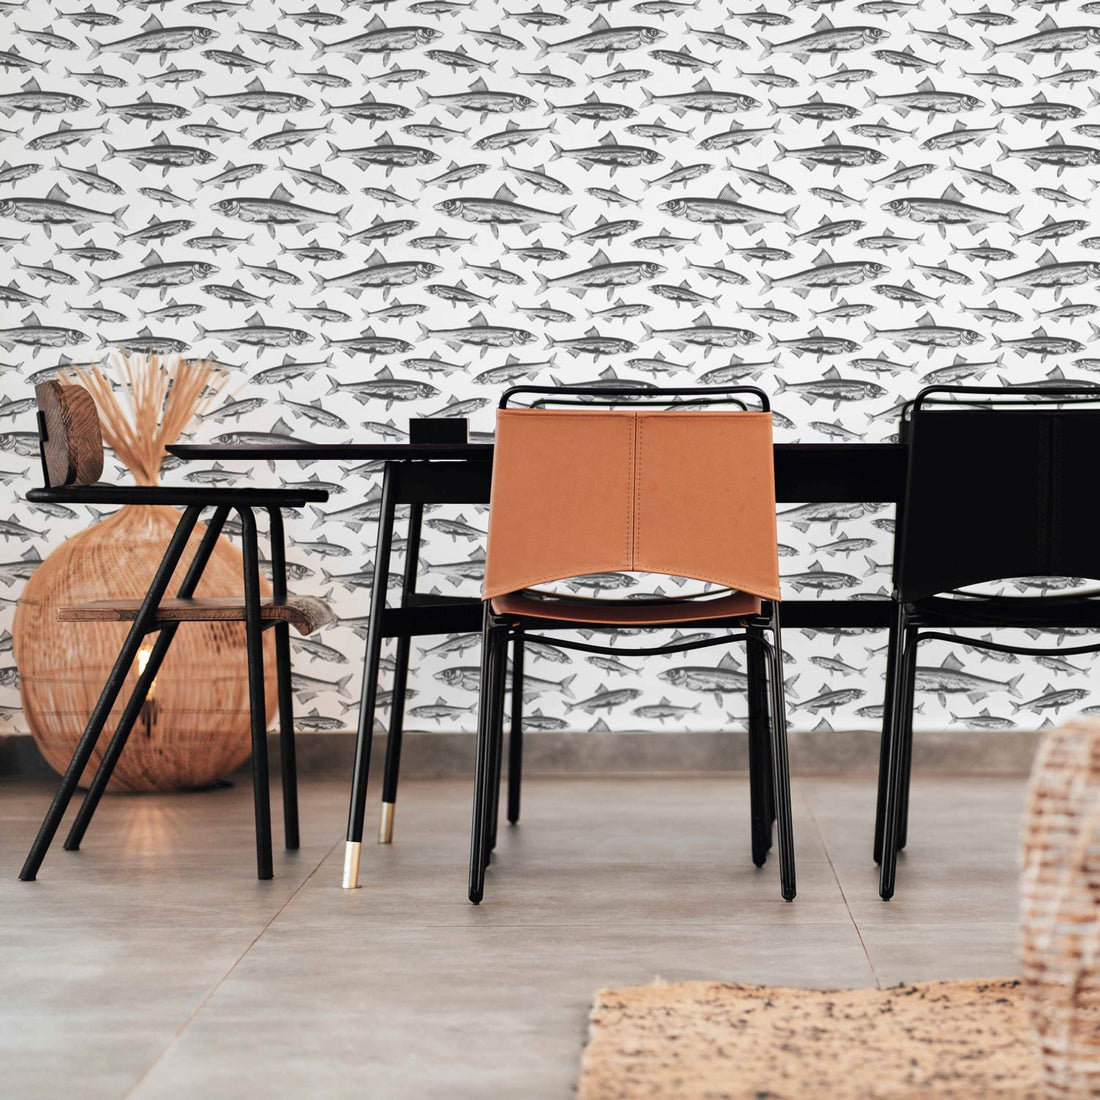 little grey fish pattern removable wallpaper in dining room interior